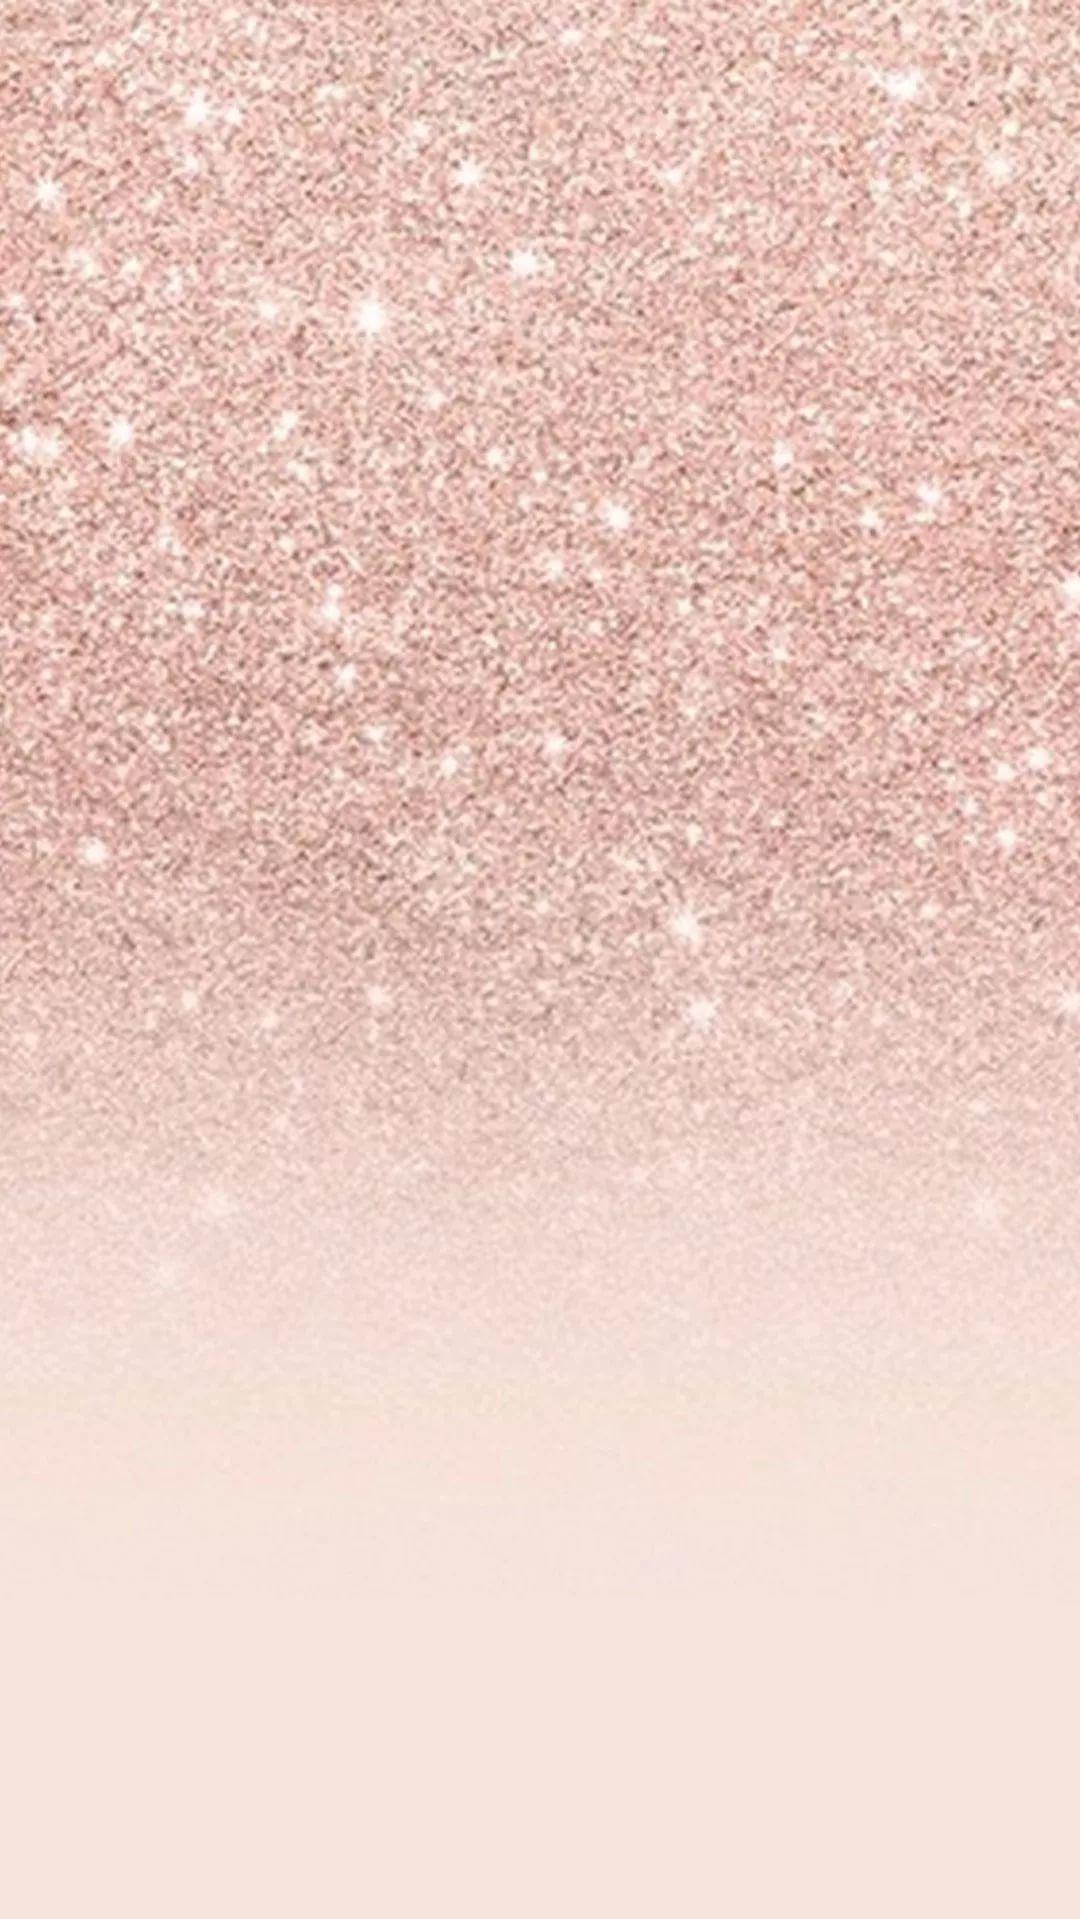 Cute Rose Gold iPhone Wallpaper On